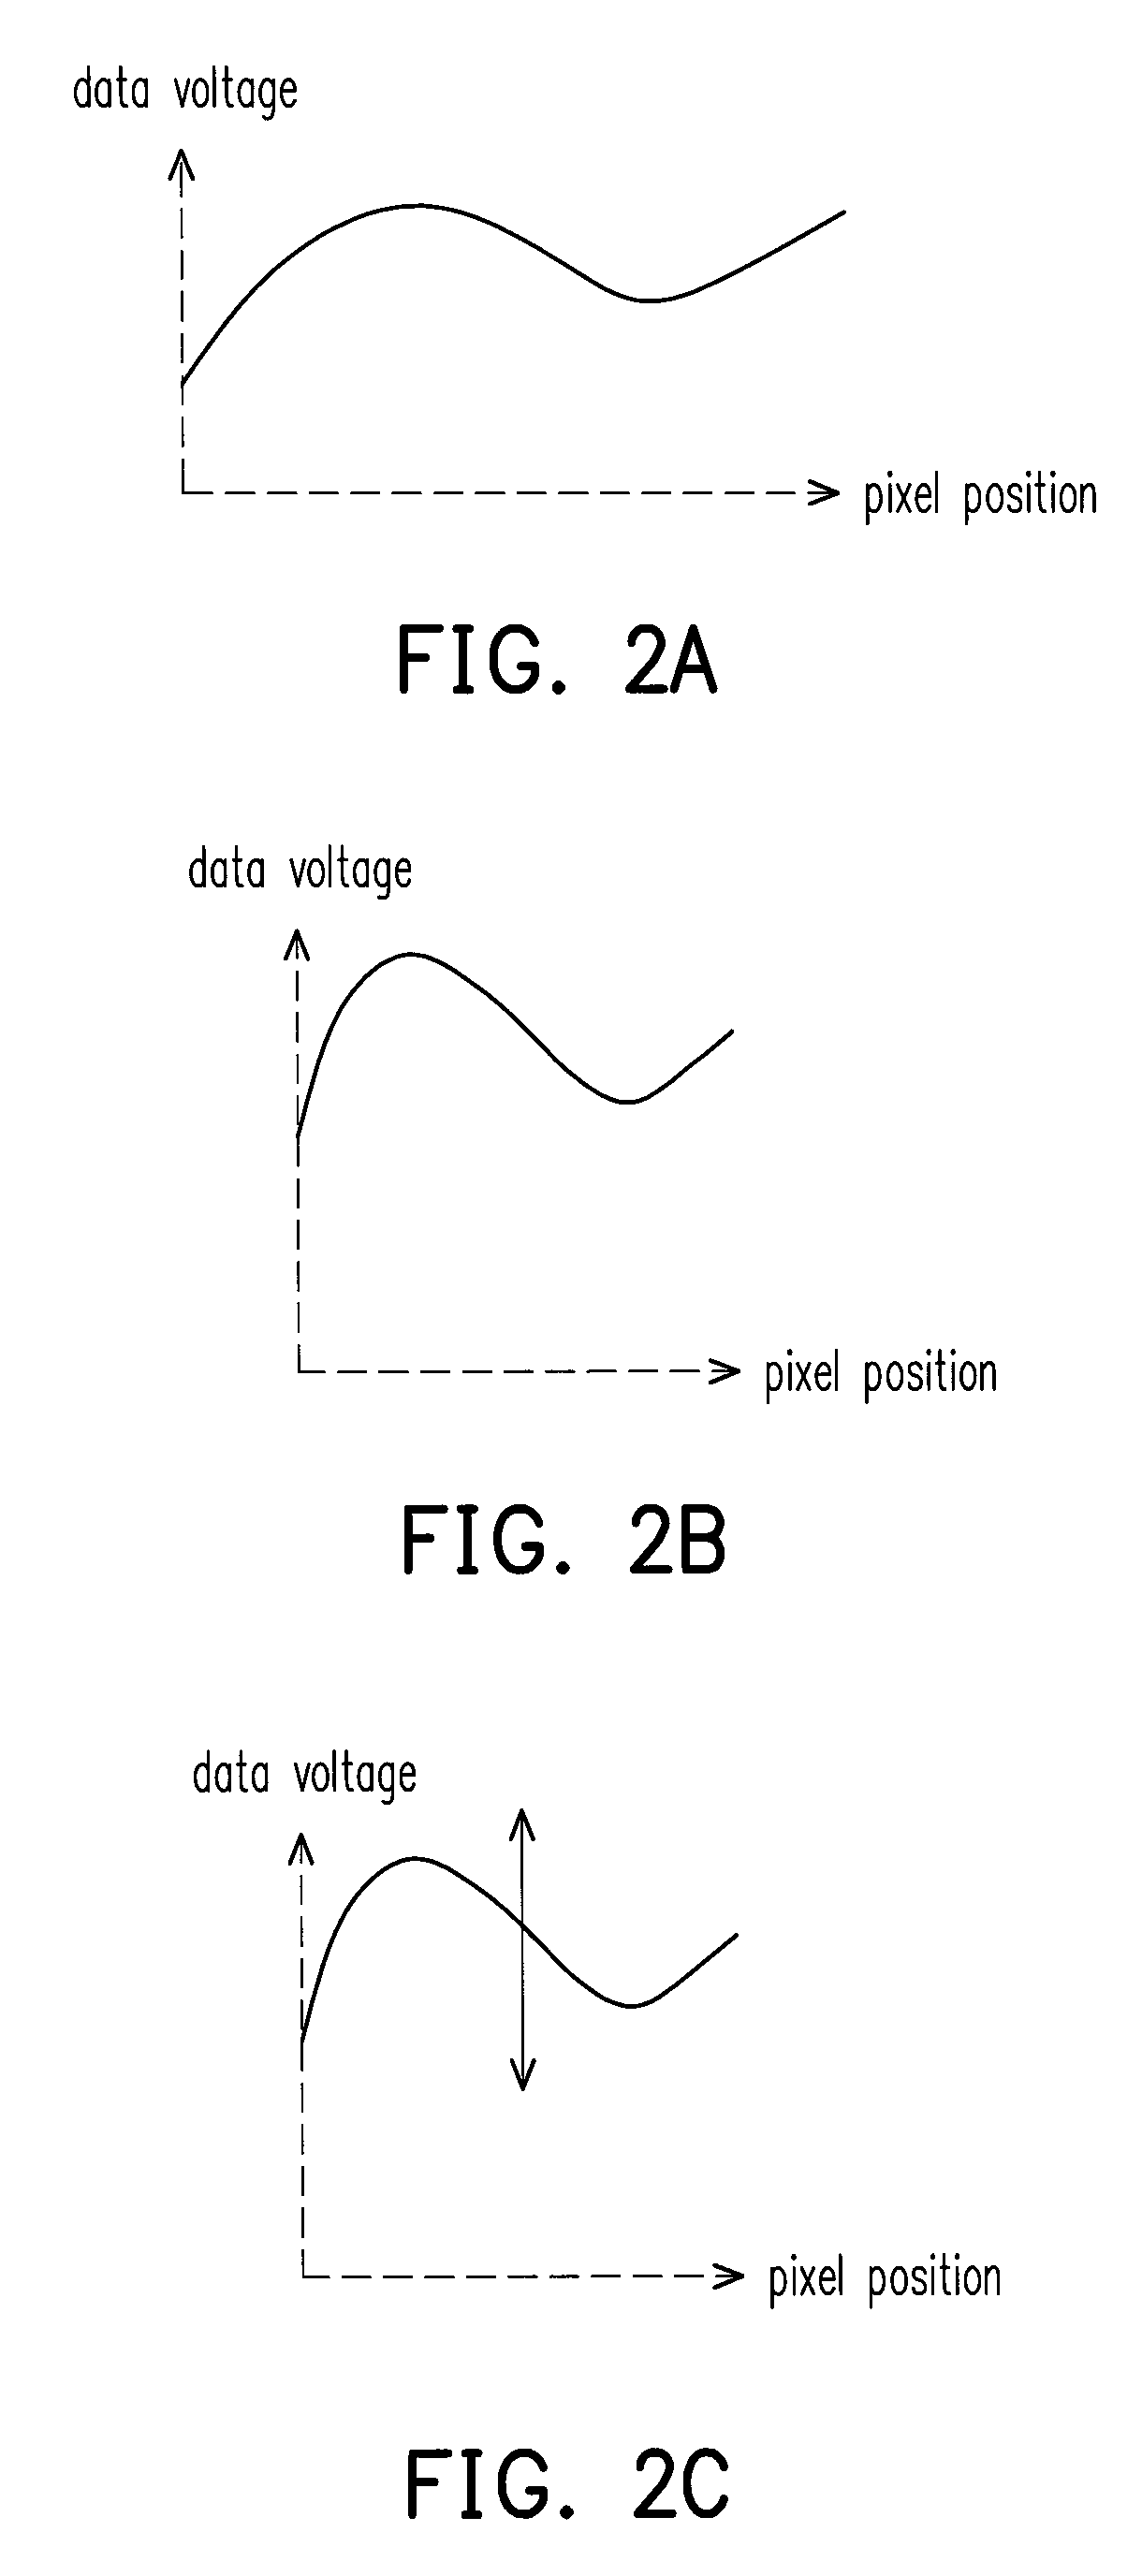 Image sensing apparatus and black level controlling method thereof